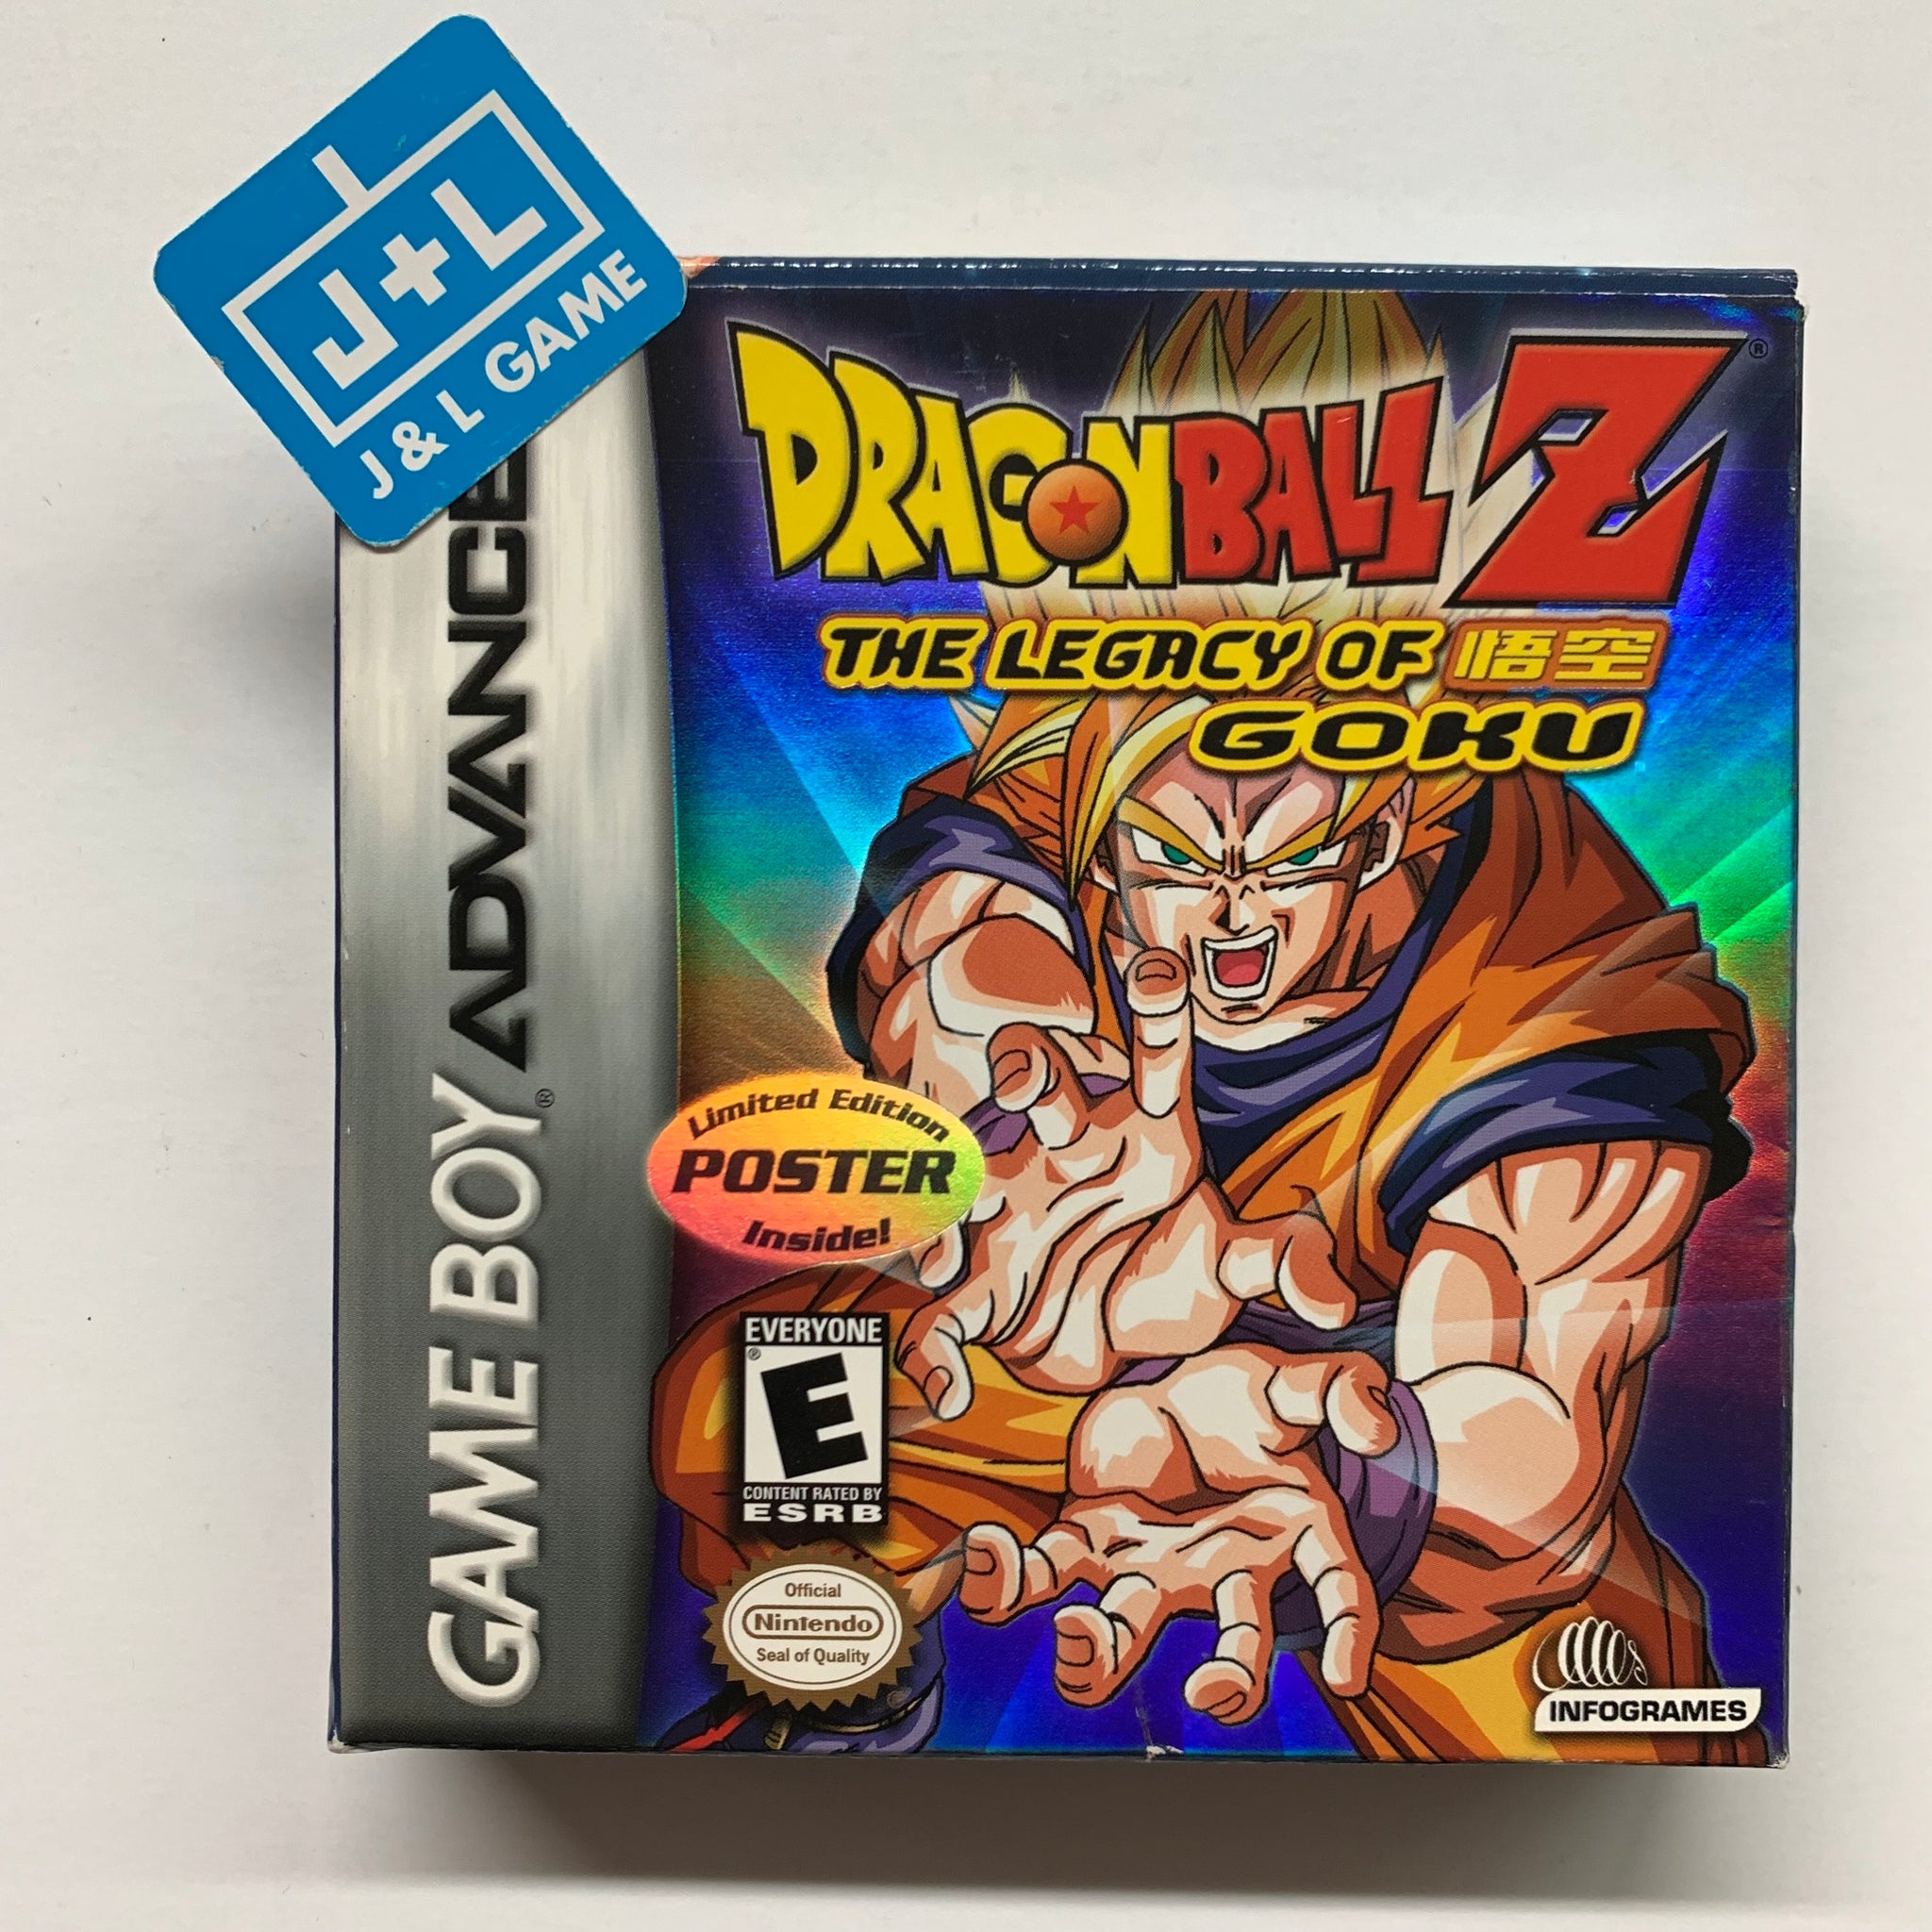 DRAGON BALL Z: THE LEGACY OF GOKU free online game on